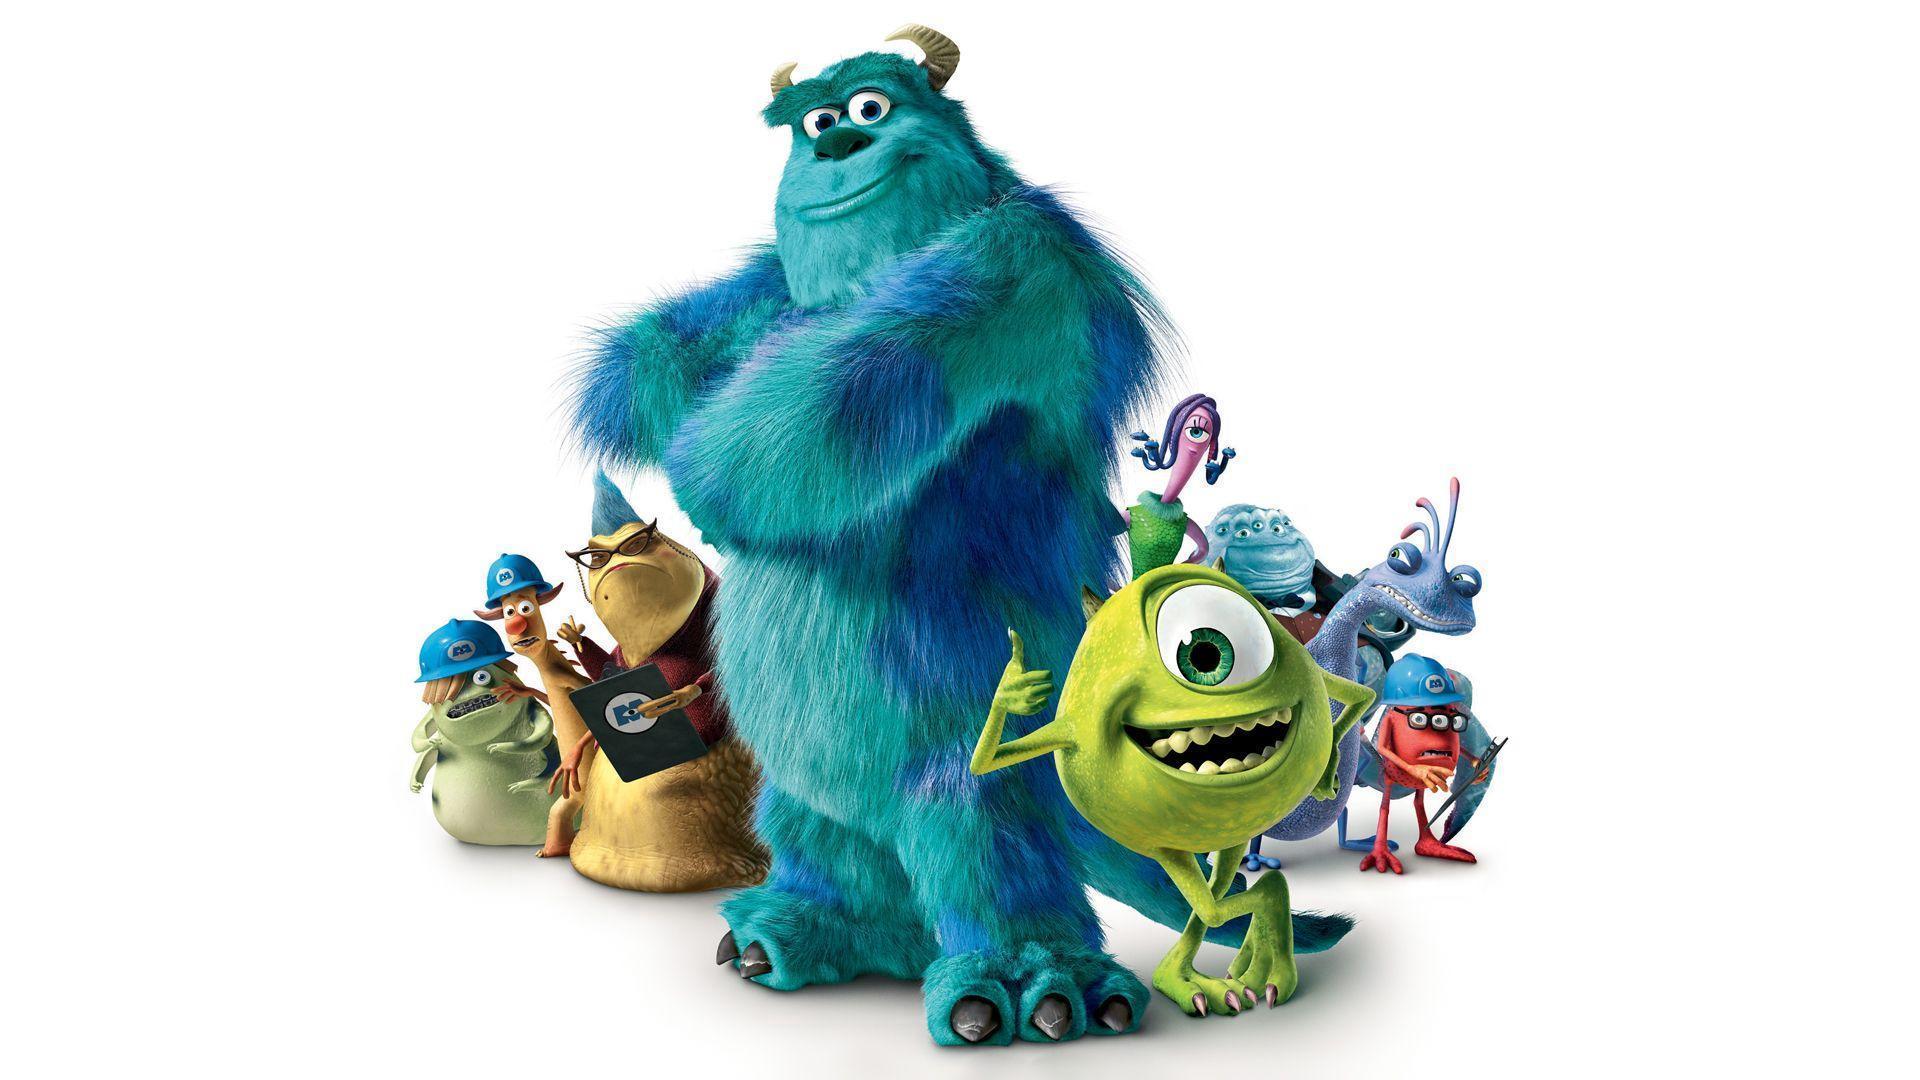 17 Monsters, Inc - Monsters Inc , HD Wallpaper & Backgrounds